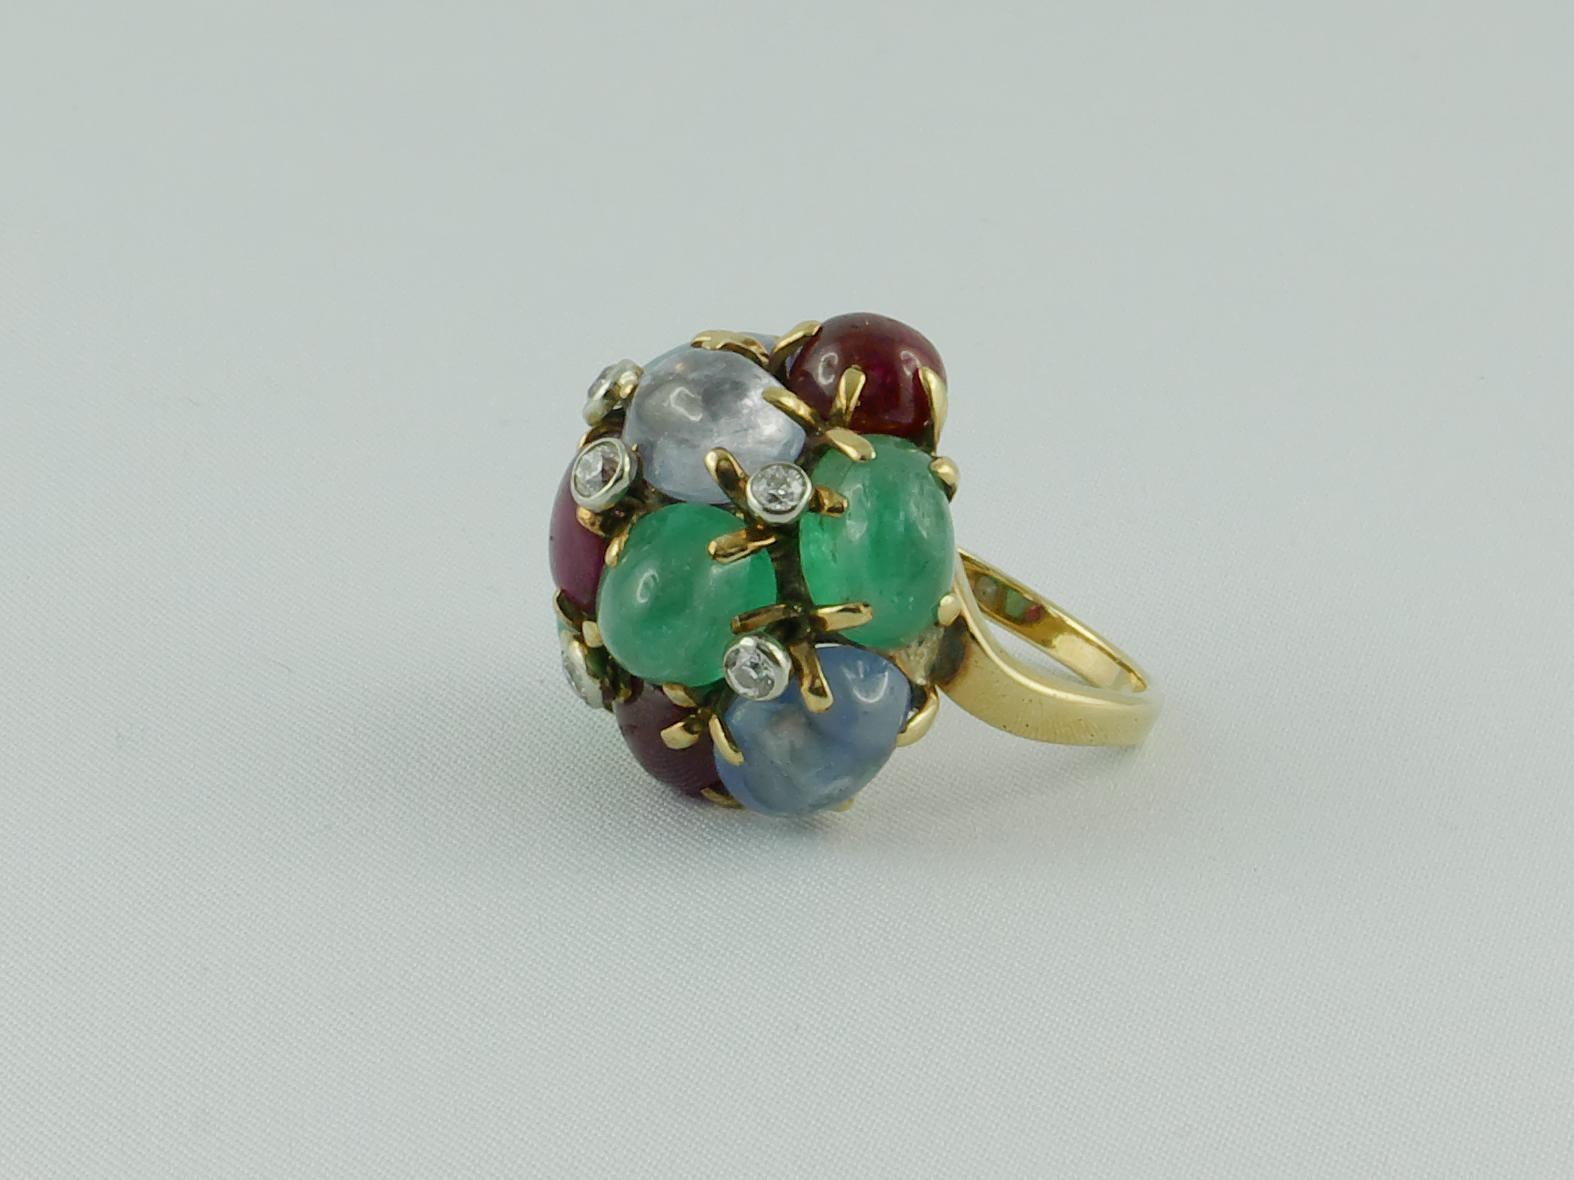 Retro TuttiFrutti Ring set  in 14 karat Yellow Gold with  3 cabochon Rubies, 3 cabochon Sapphires,  3 cabochon Emeralds and 5 diamonds, weighing a total of  14.5 Grams
This rare cocktail ring is an iconic piece of the famous jeweler Seaman Schepps.